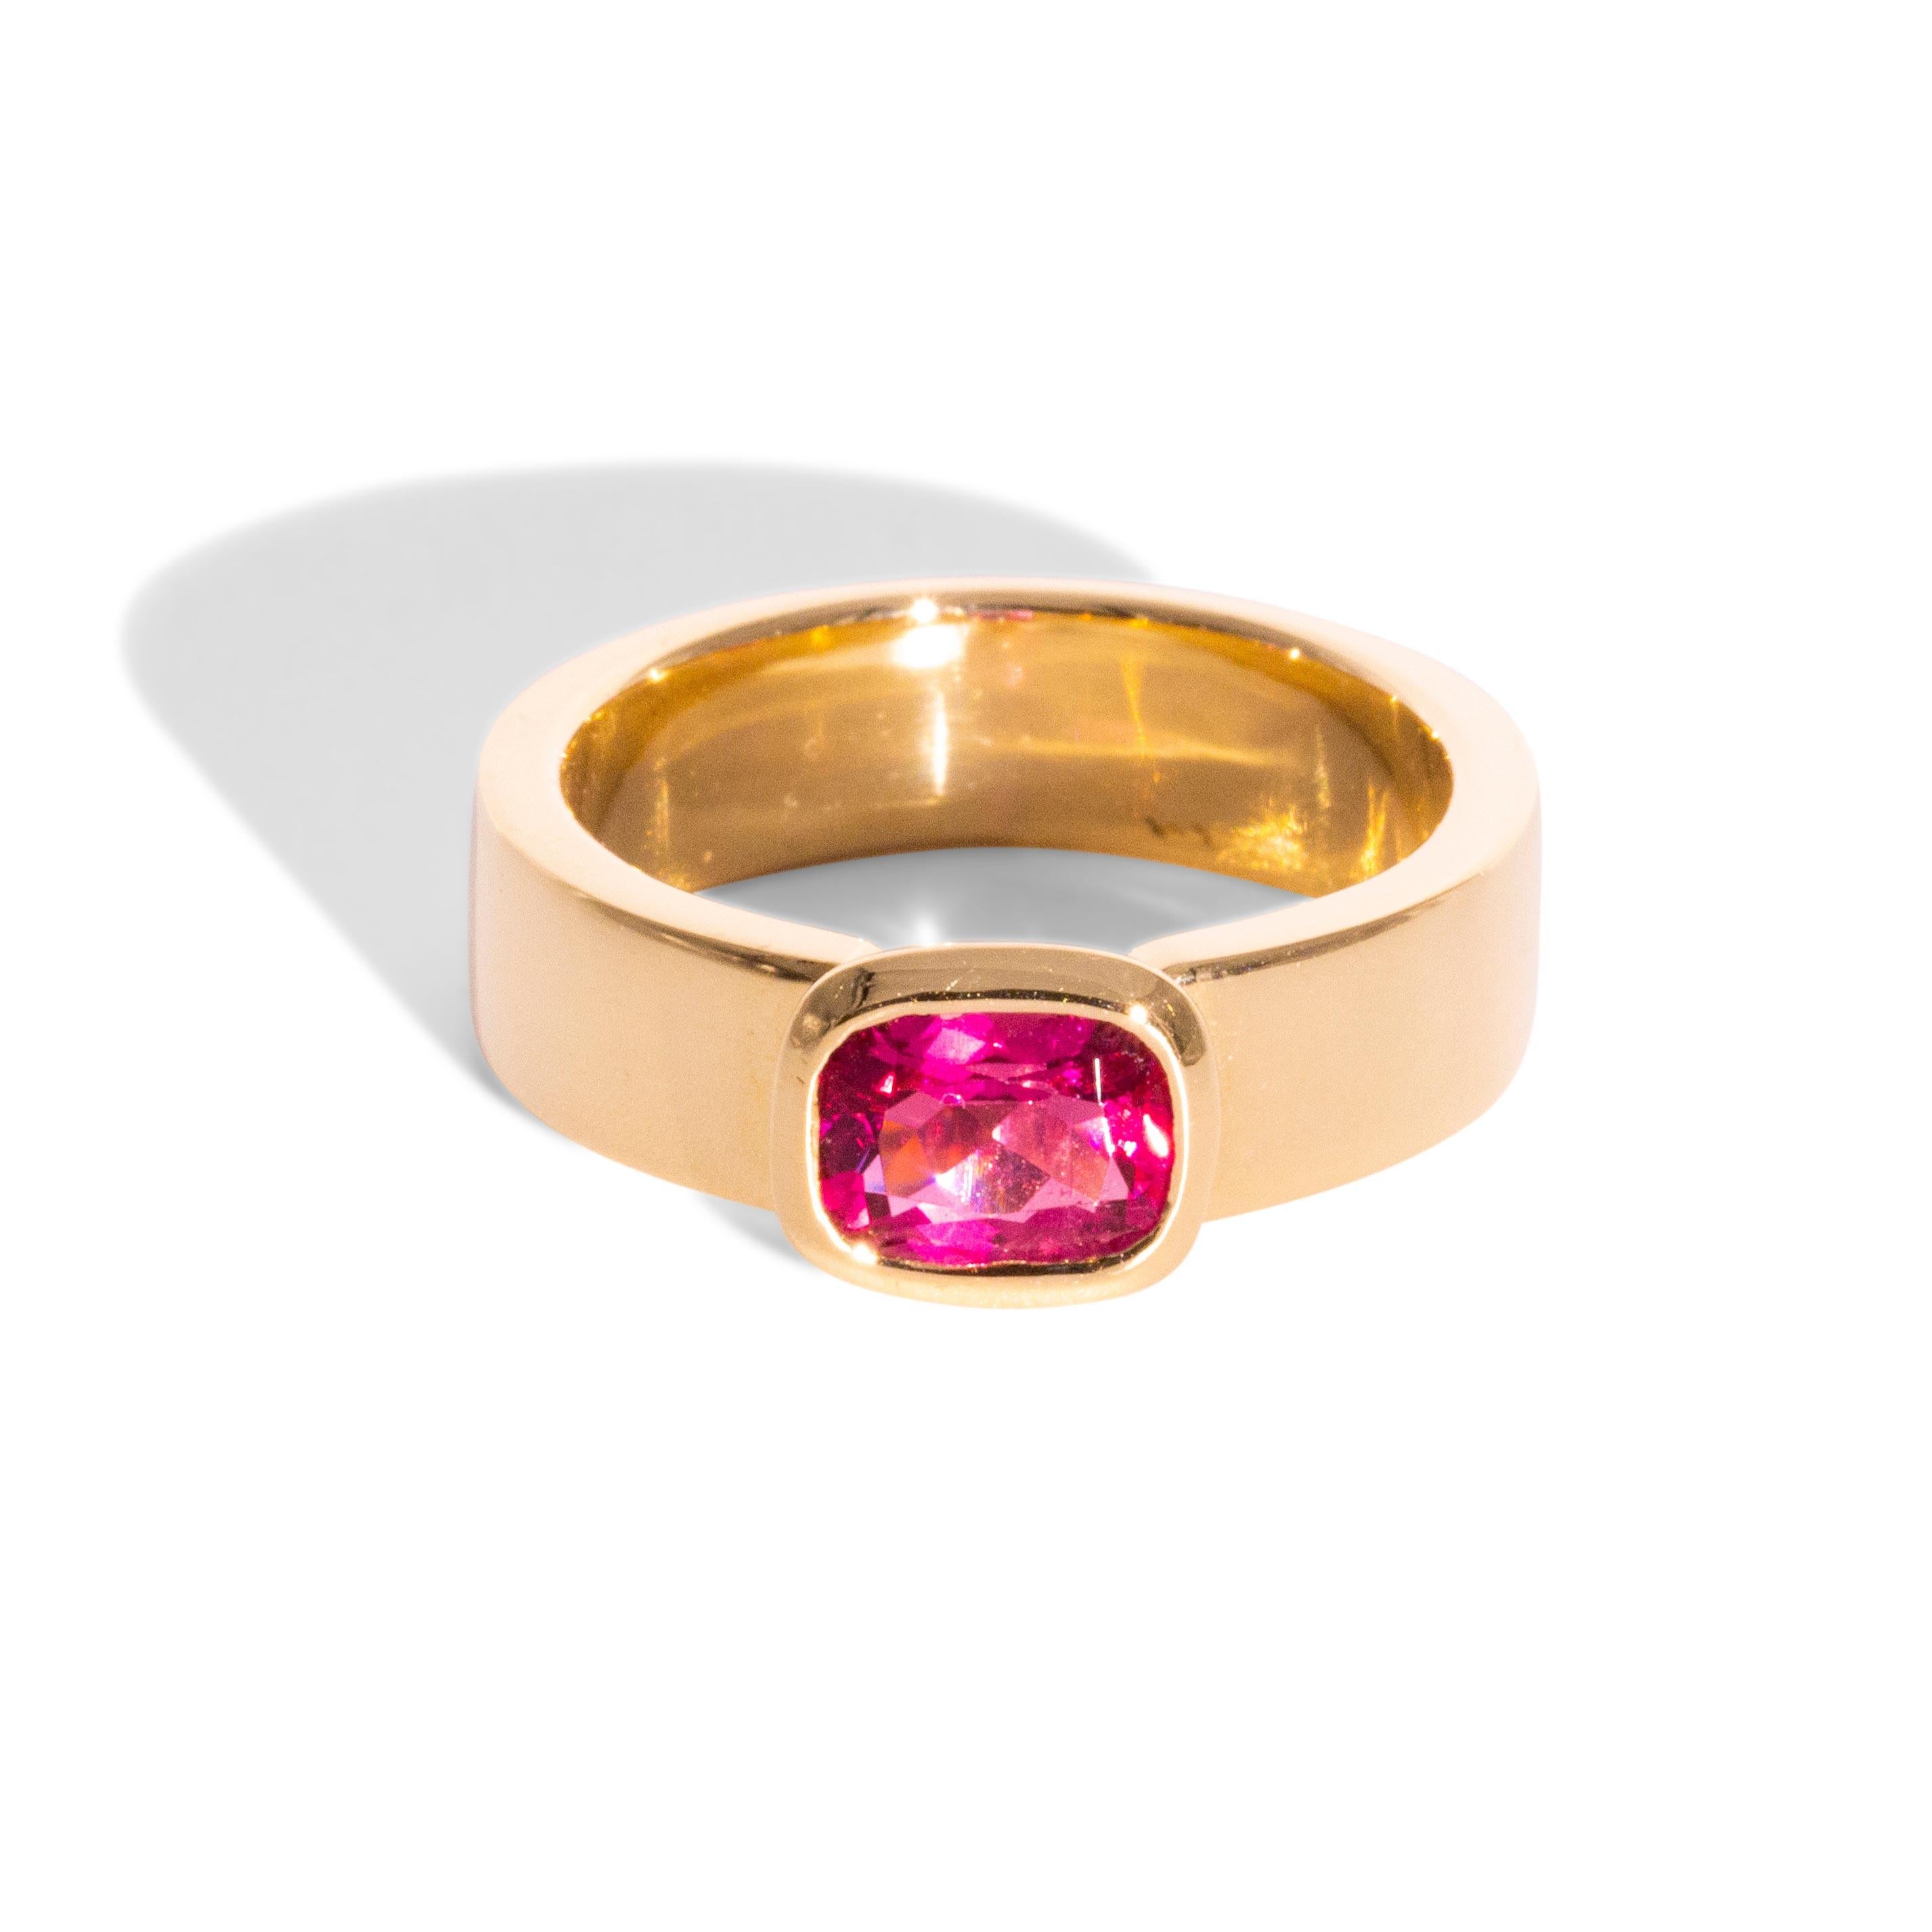 Contemporary 1.21 Carat Cushion Cut Pink Tourmaline 18 Carat Yellow Gold Cocktail Ring For Sale